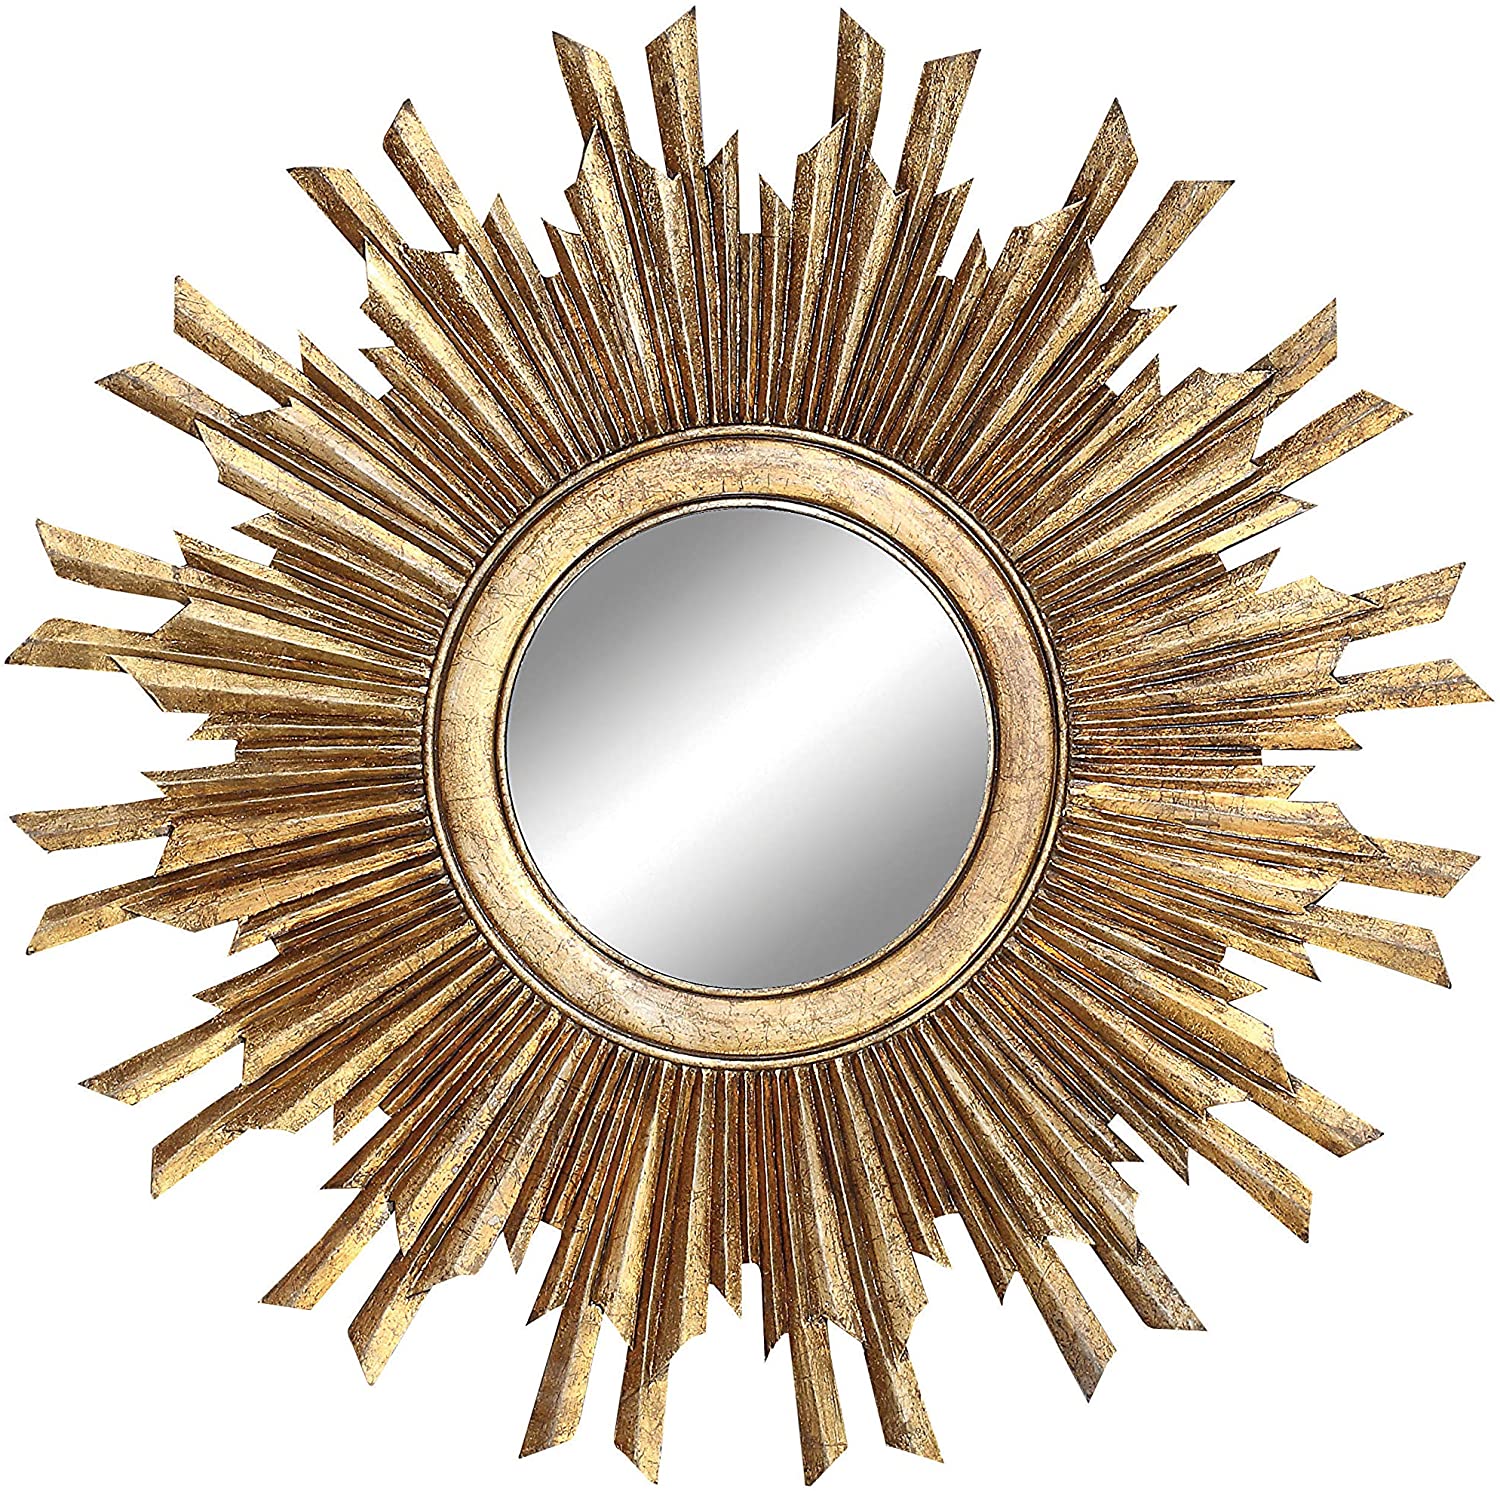 Creative Co-Op Round Sunburst Wall Mirror with Gold Finish pc291